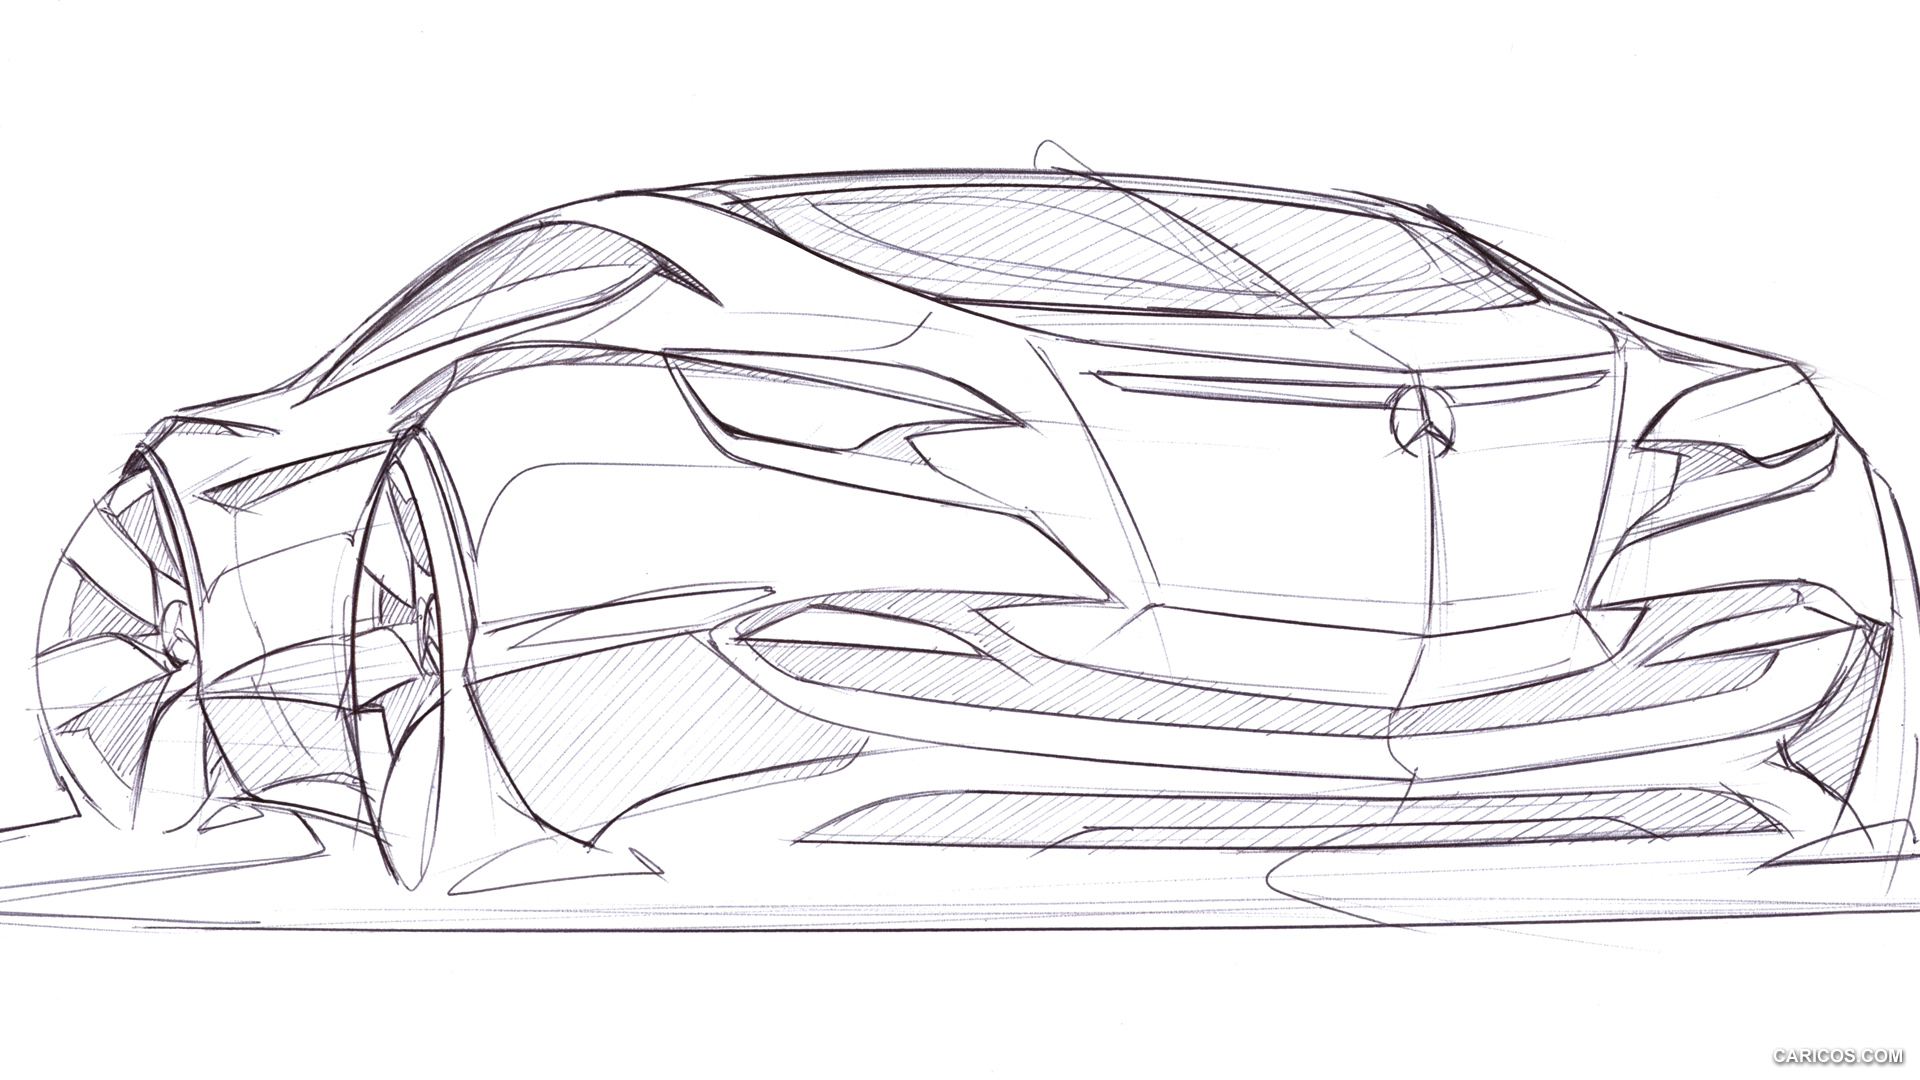 Mercedes-Benz F800 Style Concept (2010)  - Design Sketch, #80 of 120